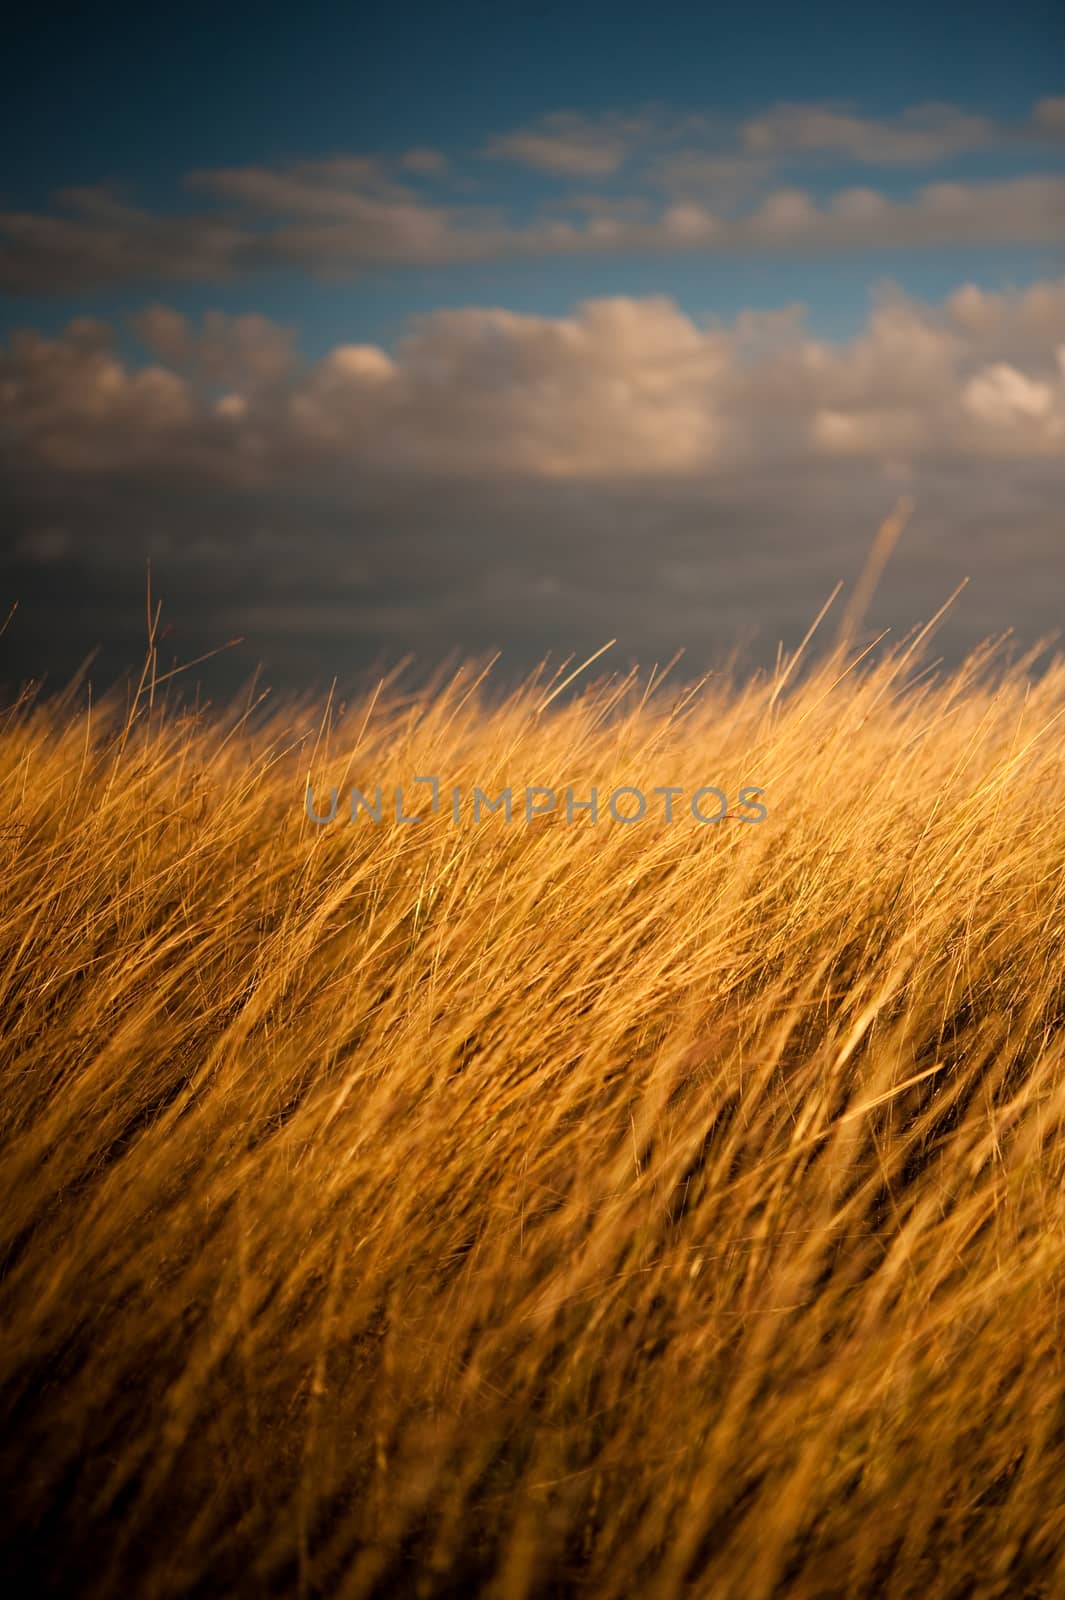 Image of tall grasses in the fall with a cloudy blue sky as background